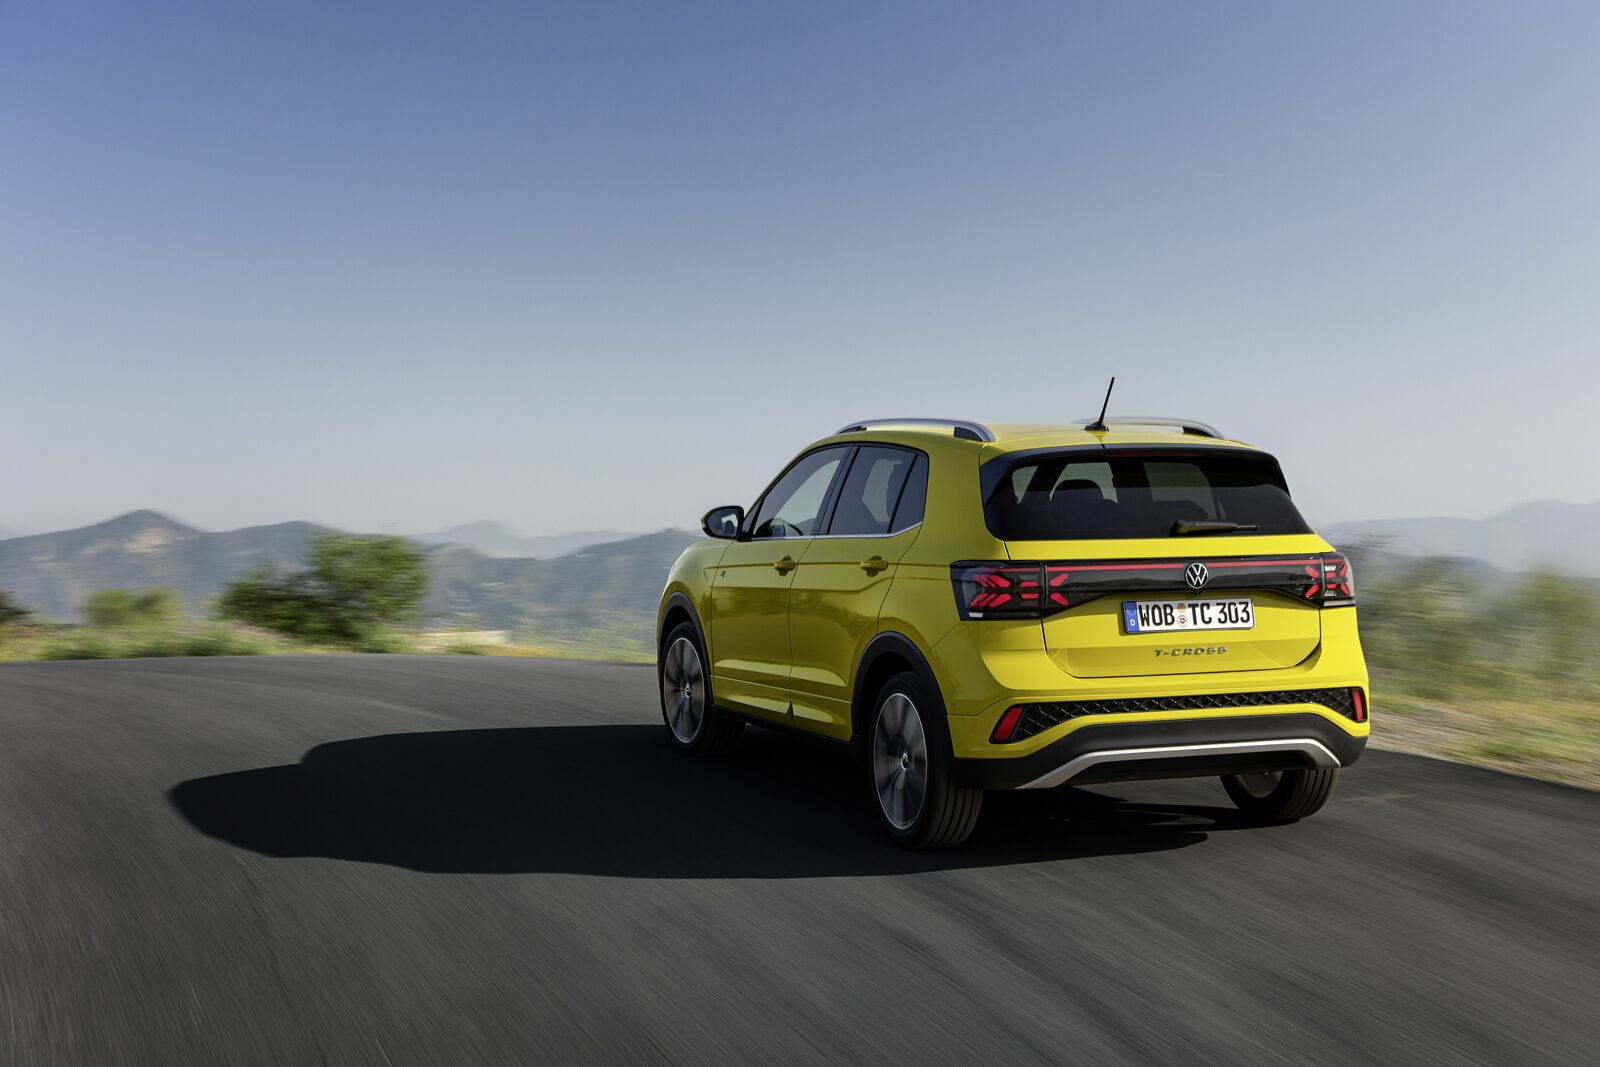 Volkswagen reveals new T-Cross: major update for the successful compact SUV